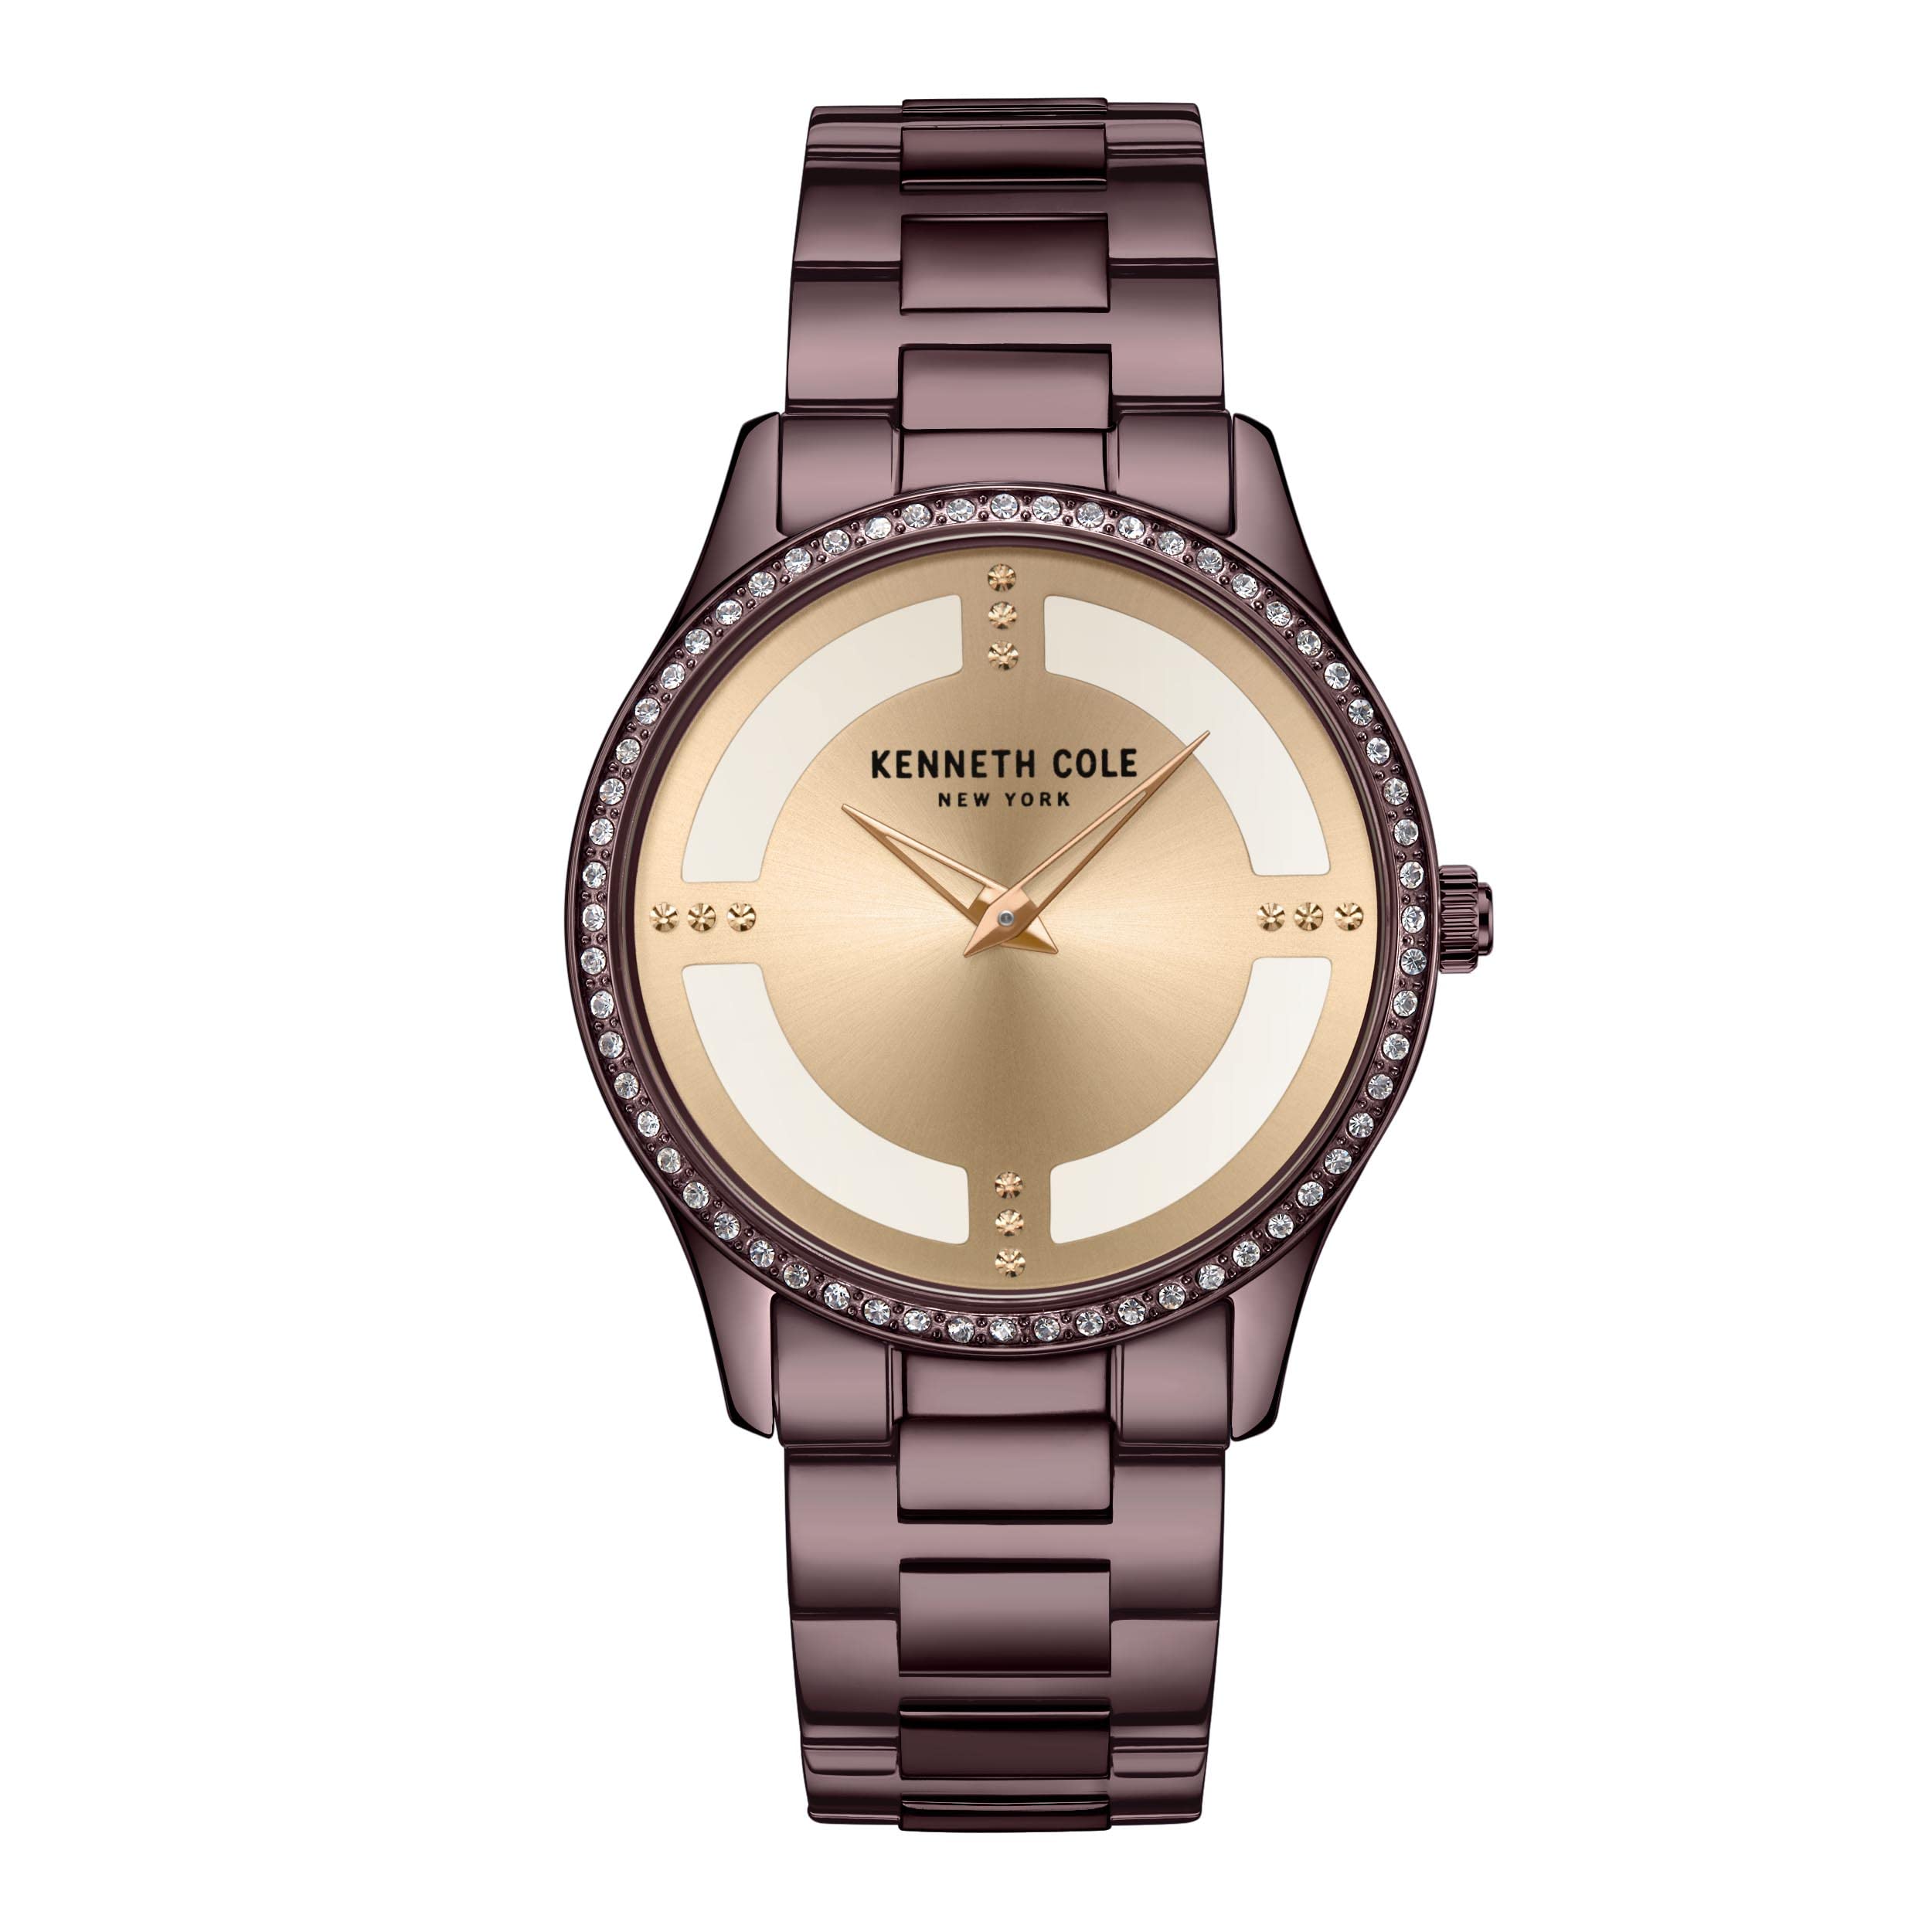 Kenneth Cole New York Women's 34.5mm Transparency Dial Watch